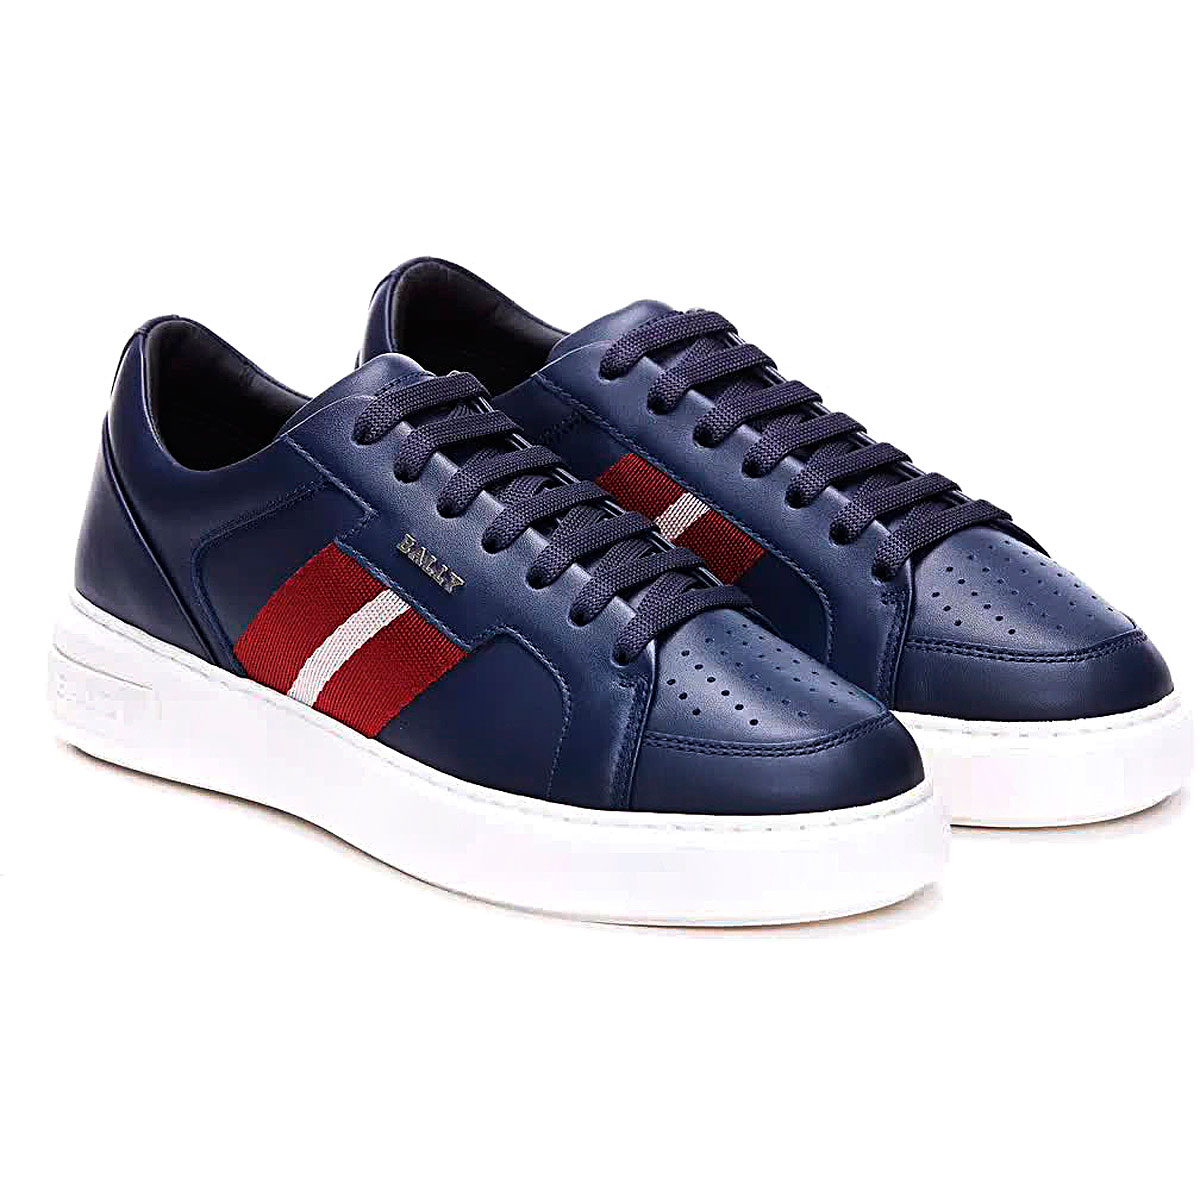 Mens Shoes Bally, Style code: 600799-25268-f029